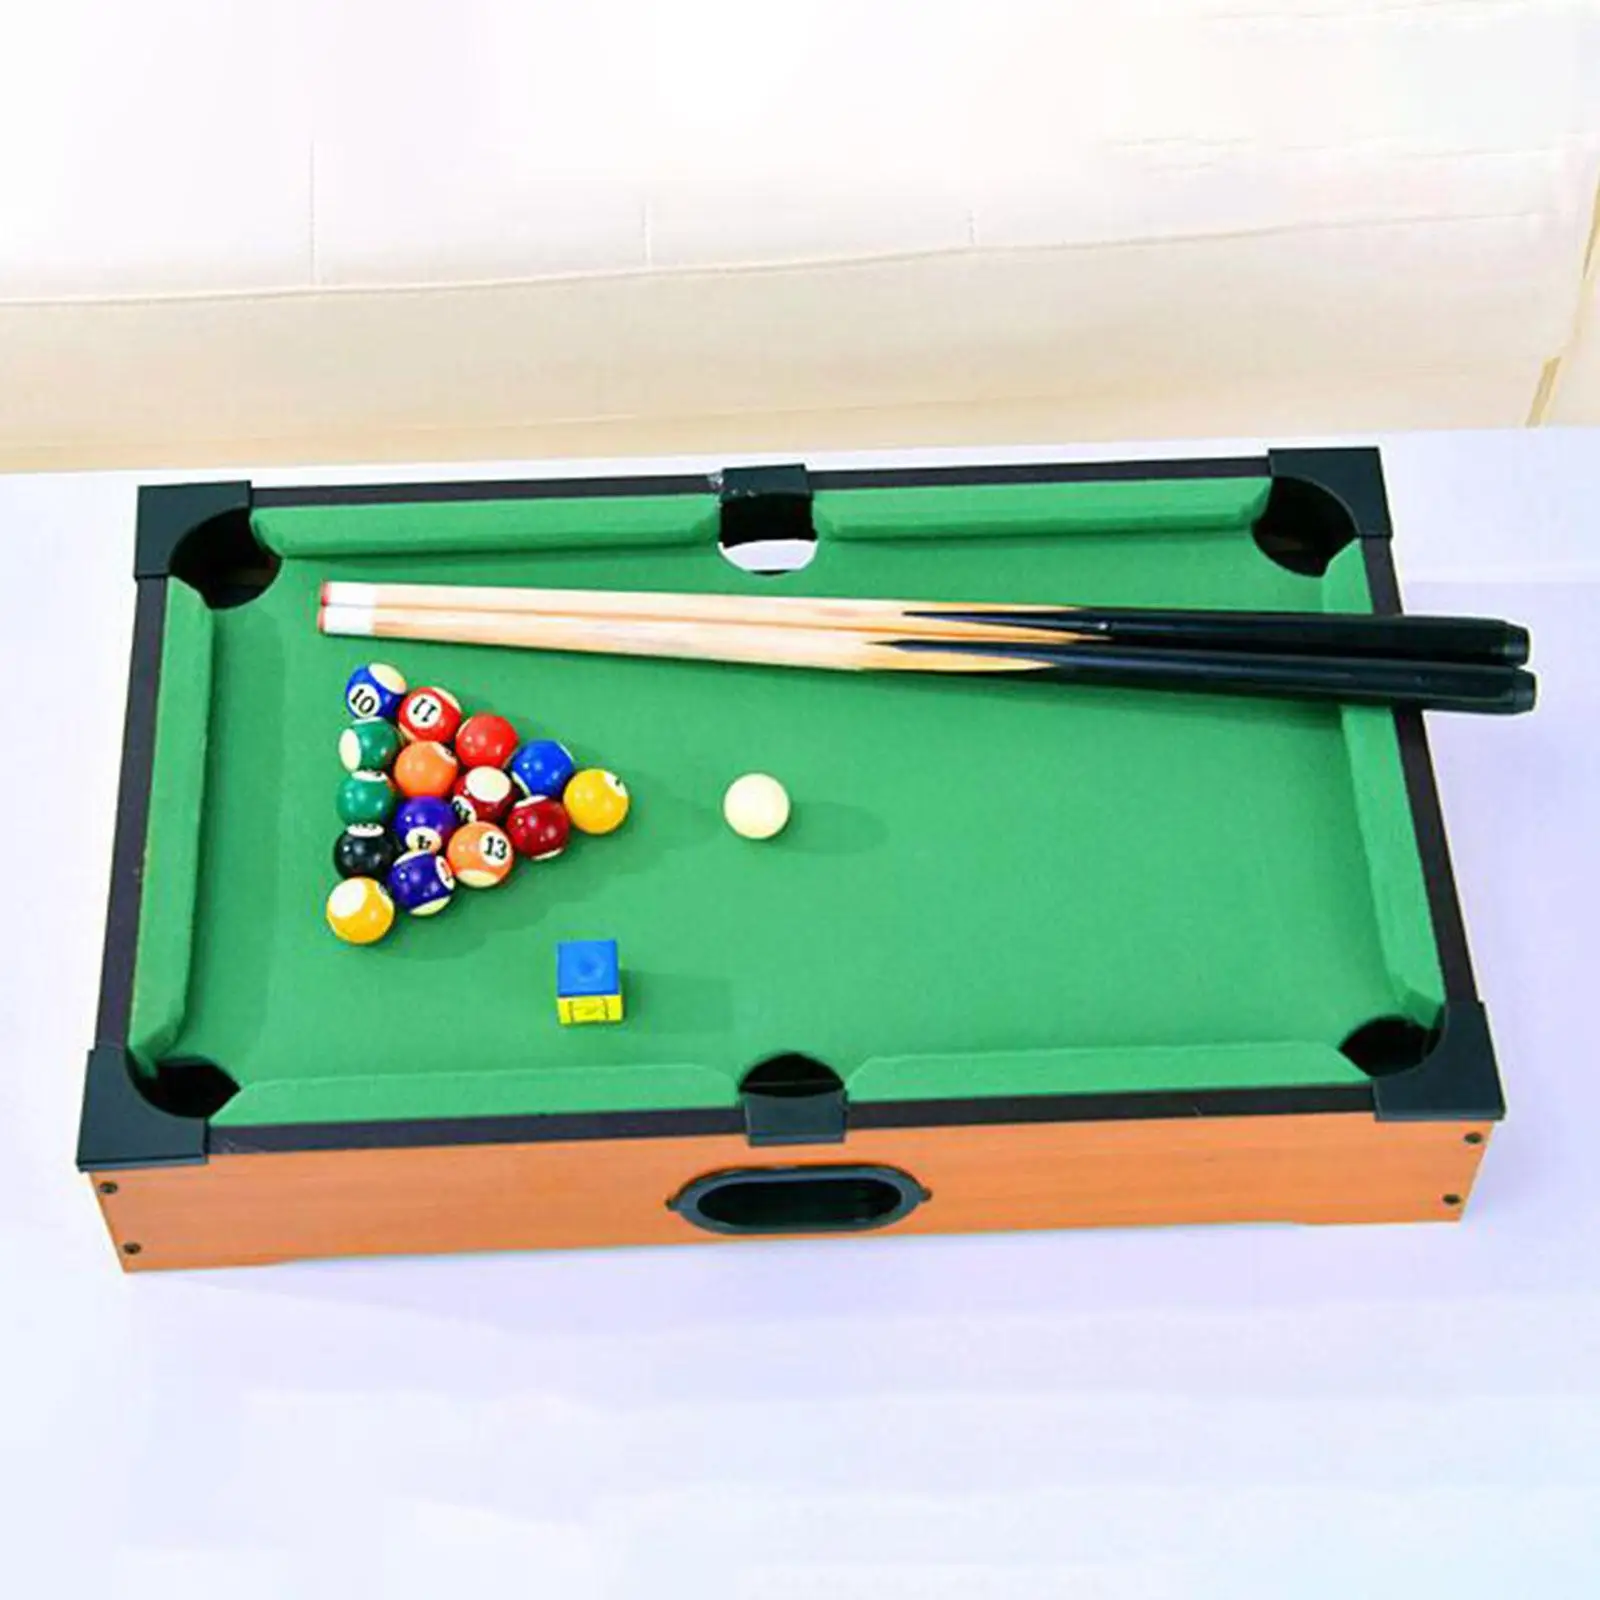 Mini Table Pool Set Home Play Motor Skills Easy to Install Miniature Billiard Game Wood for Home Desk Playroom Game Room Travel